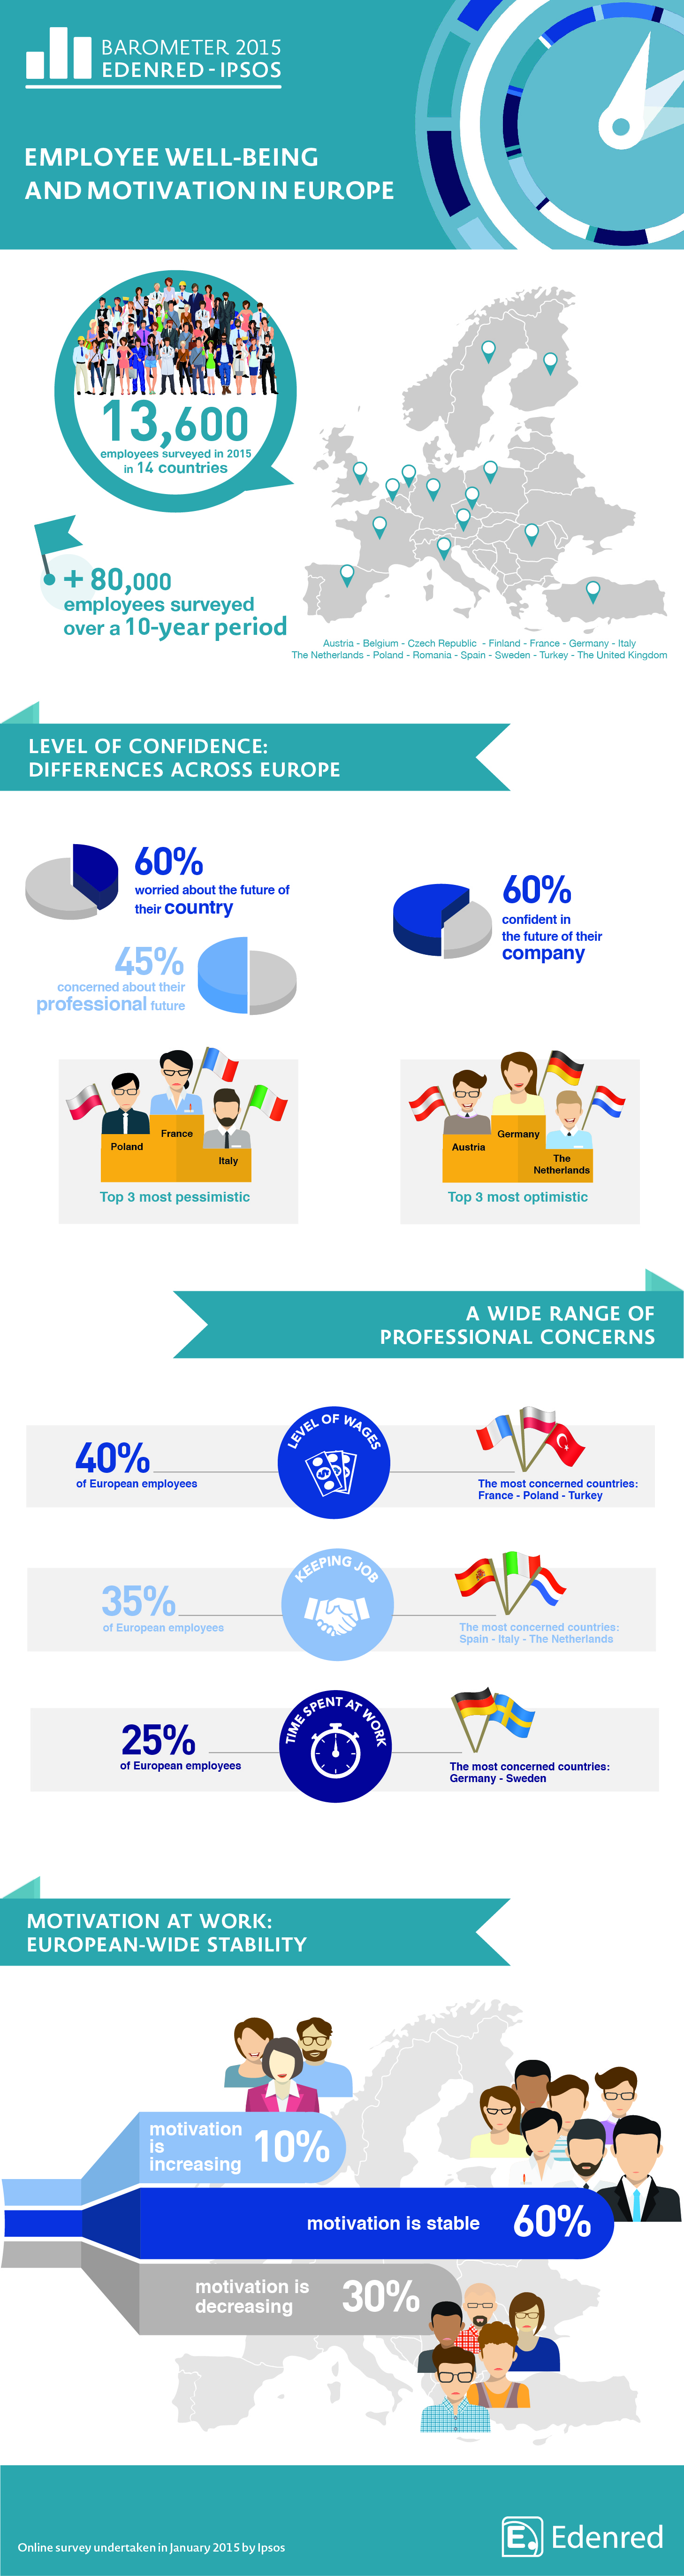 Employee well-being and motivation in Europe